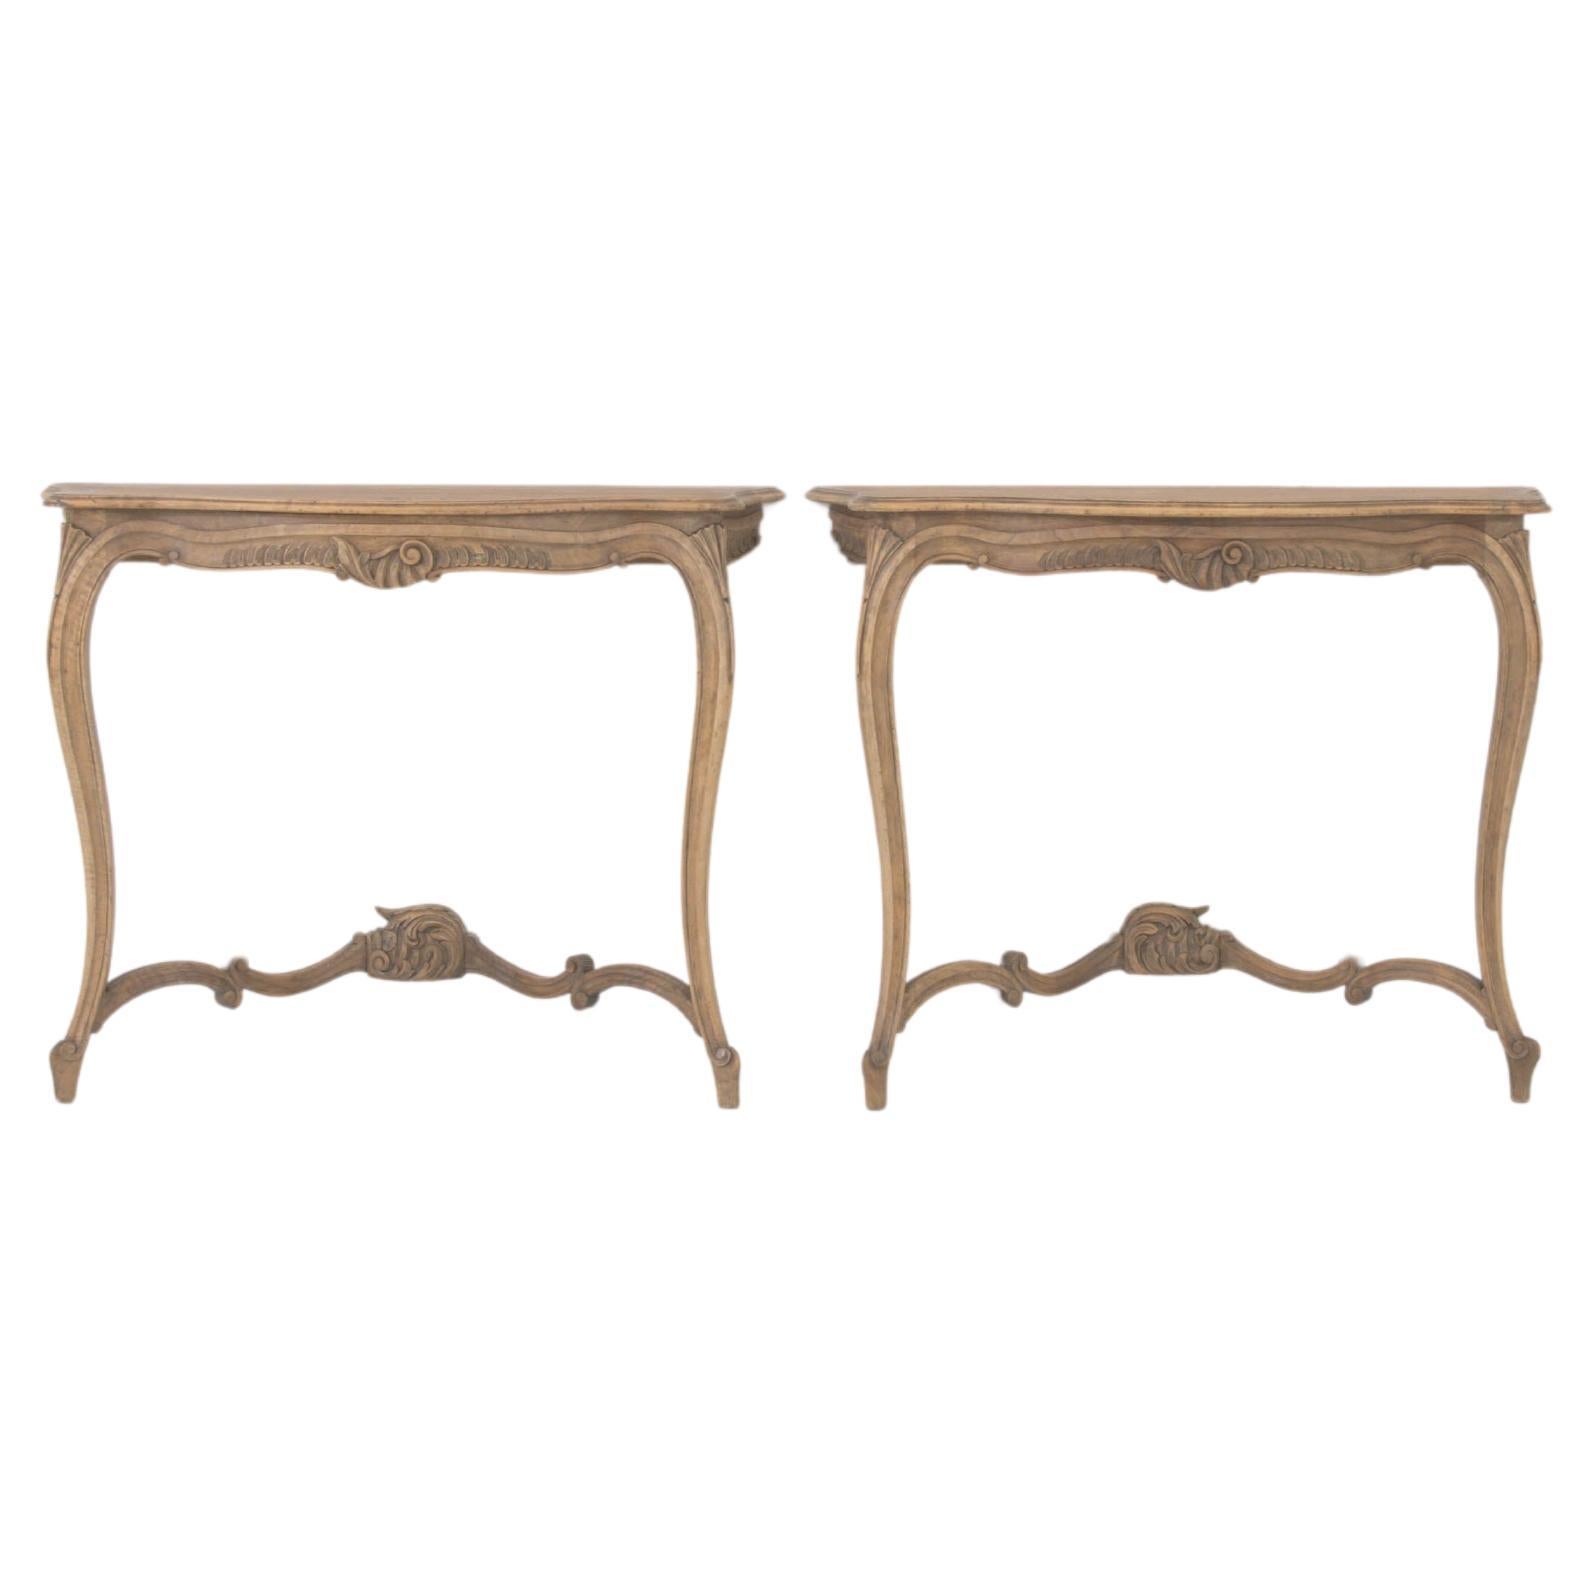 1900s French Wooden Console Tables, a Pair